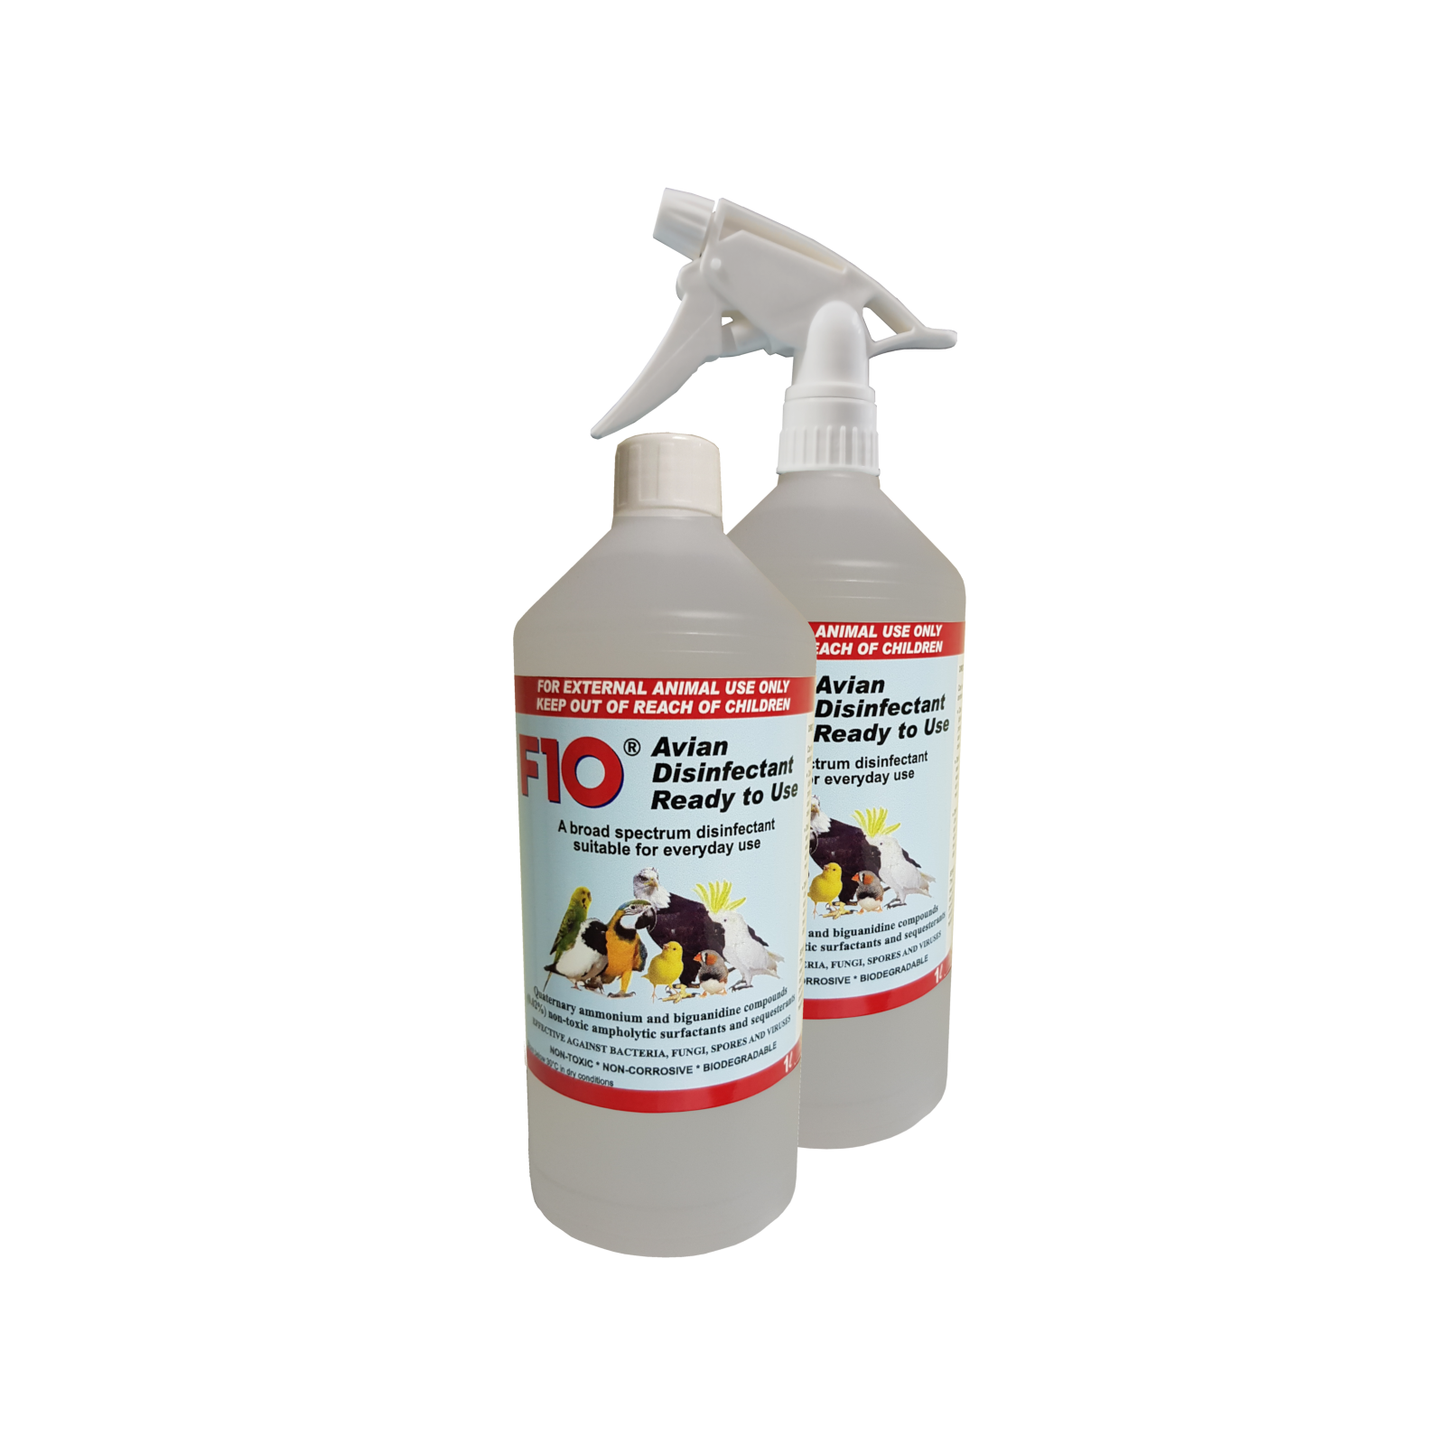 Two 1 litre bottles of F10 Avian Disinfectant Ready to Use, one with a trigger spray